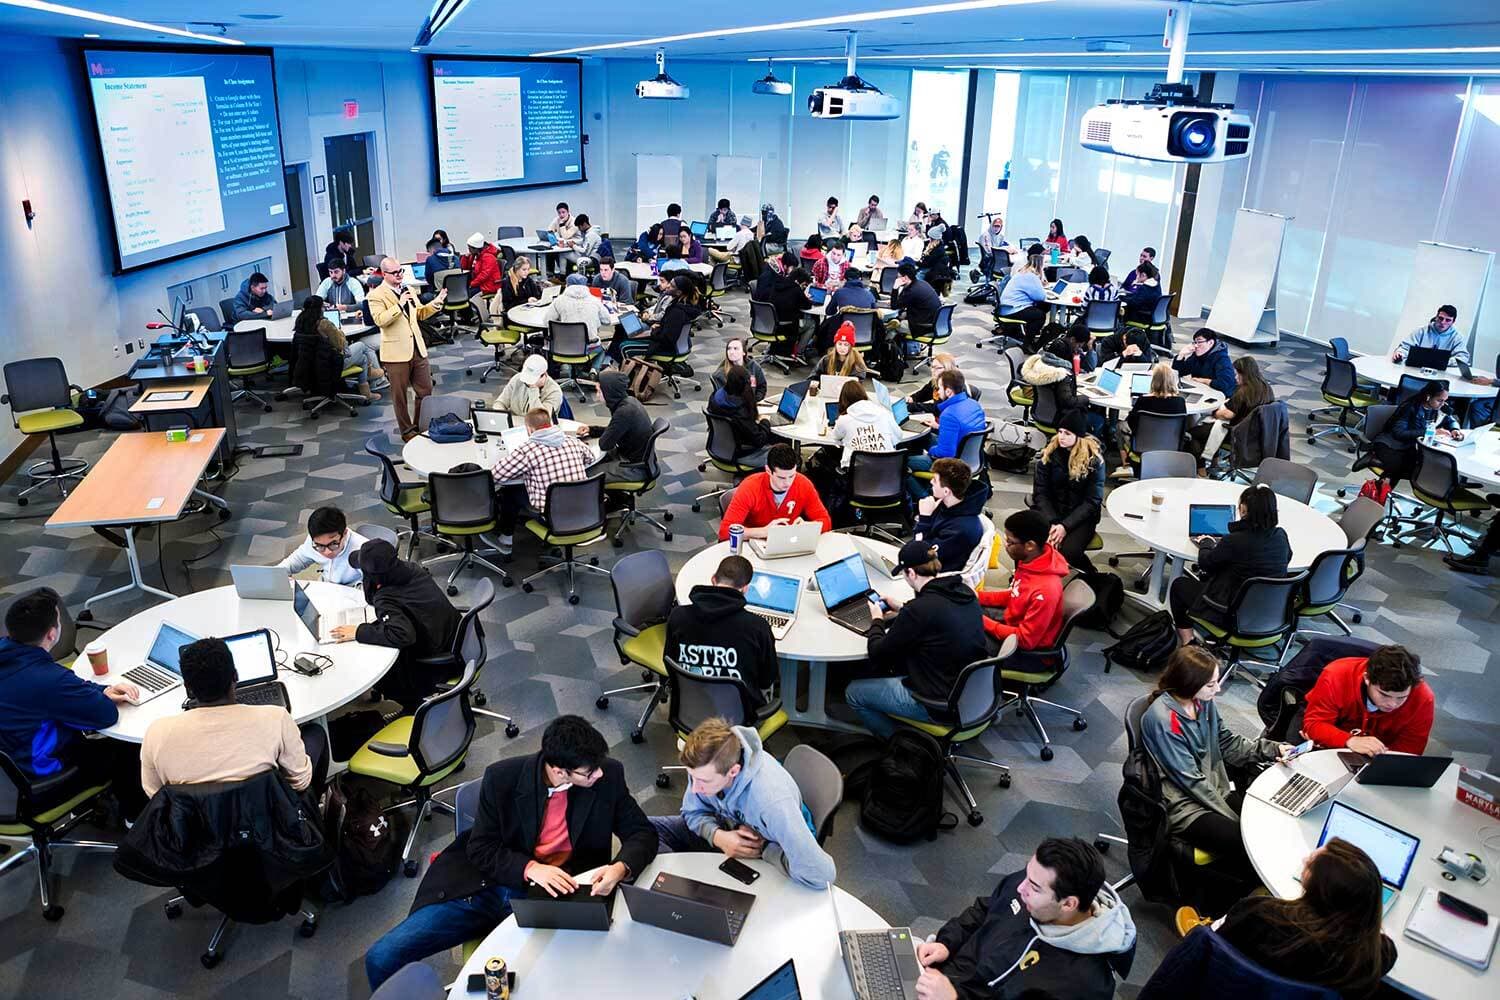 View from above of a full classroom of students sitting at round tables.